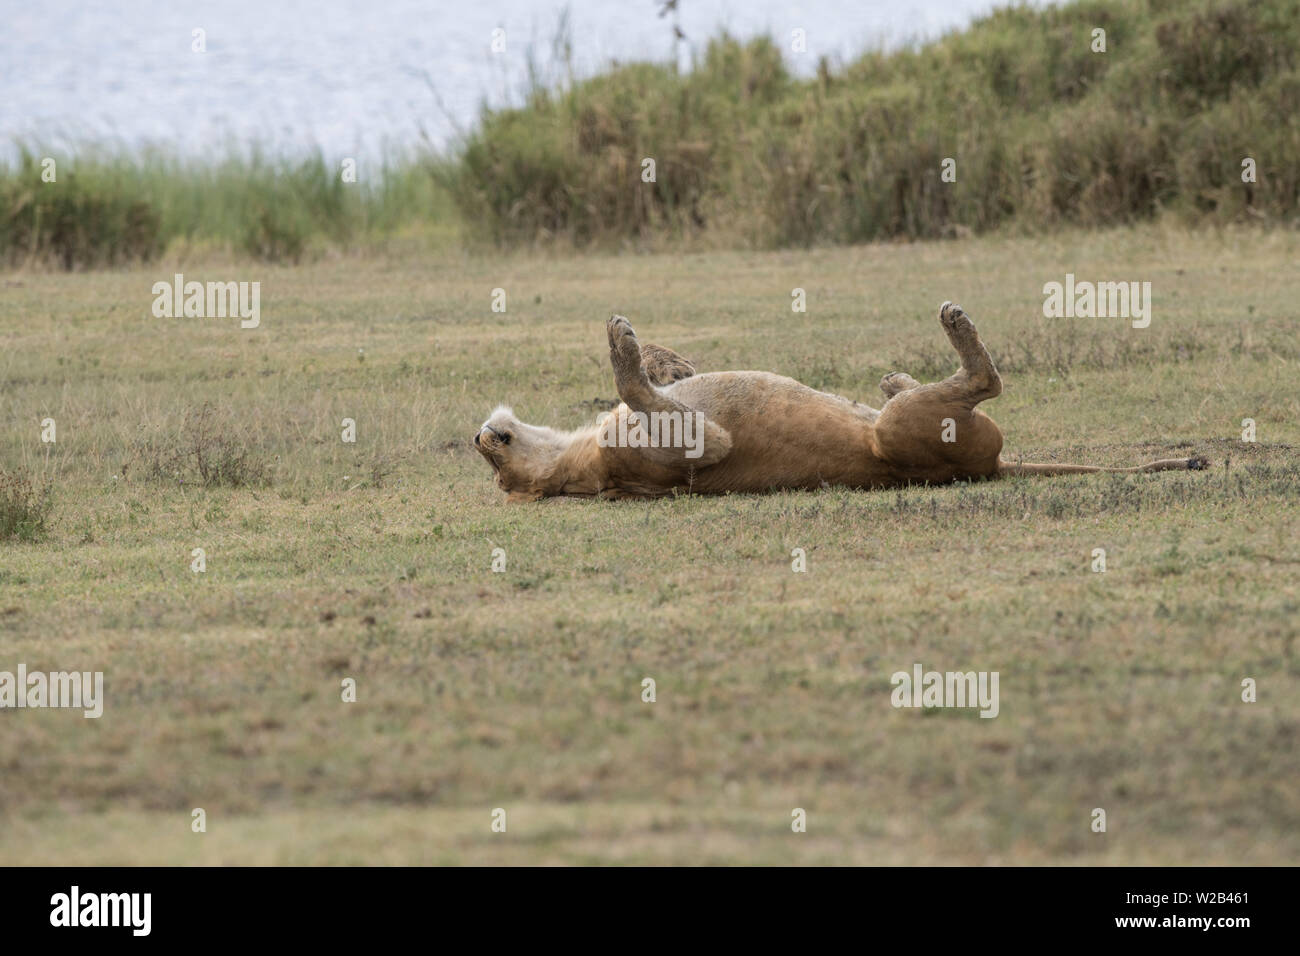 Lioness rolling over, Ngorongoro Crater Stock Photo